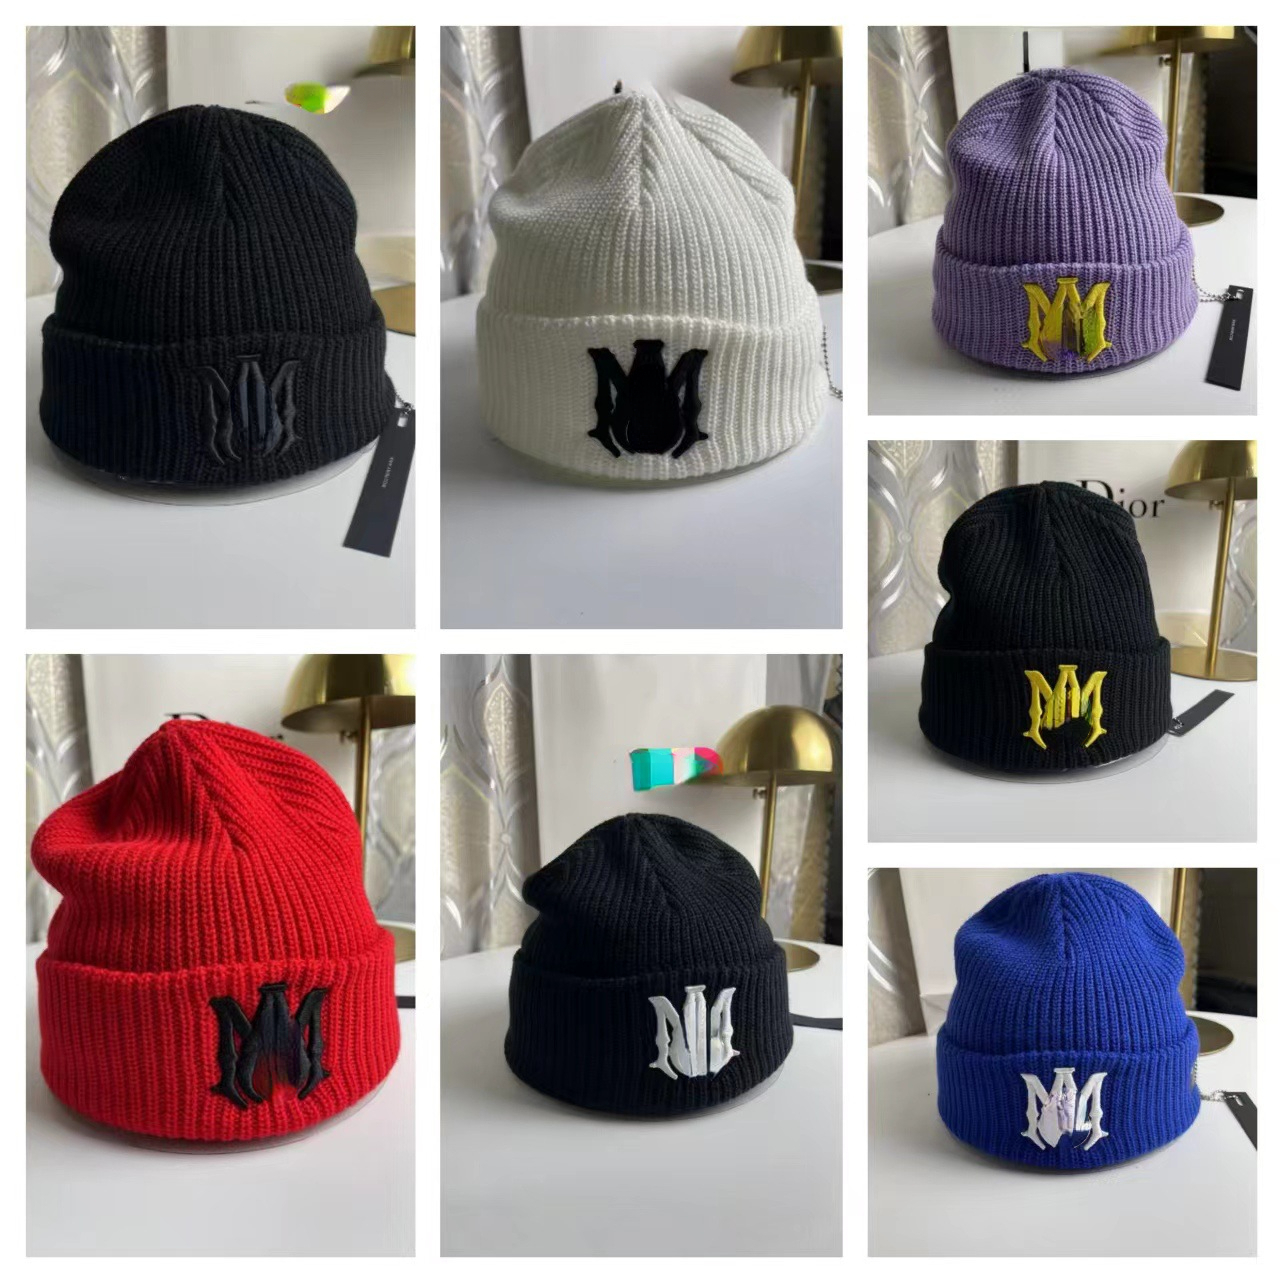 Classic Design Embroidery Knitted Hats Woolen Hood Beanies Cotton Men Casual Skull Caps275l